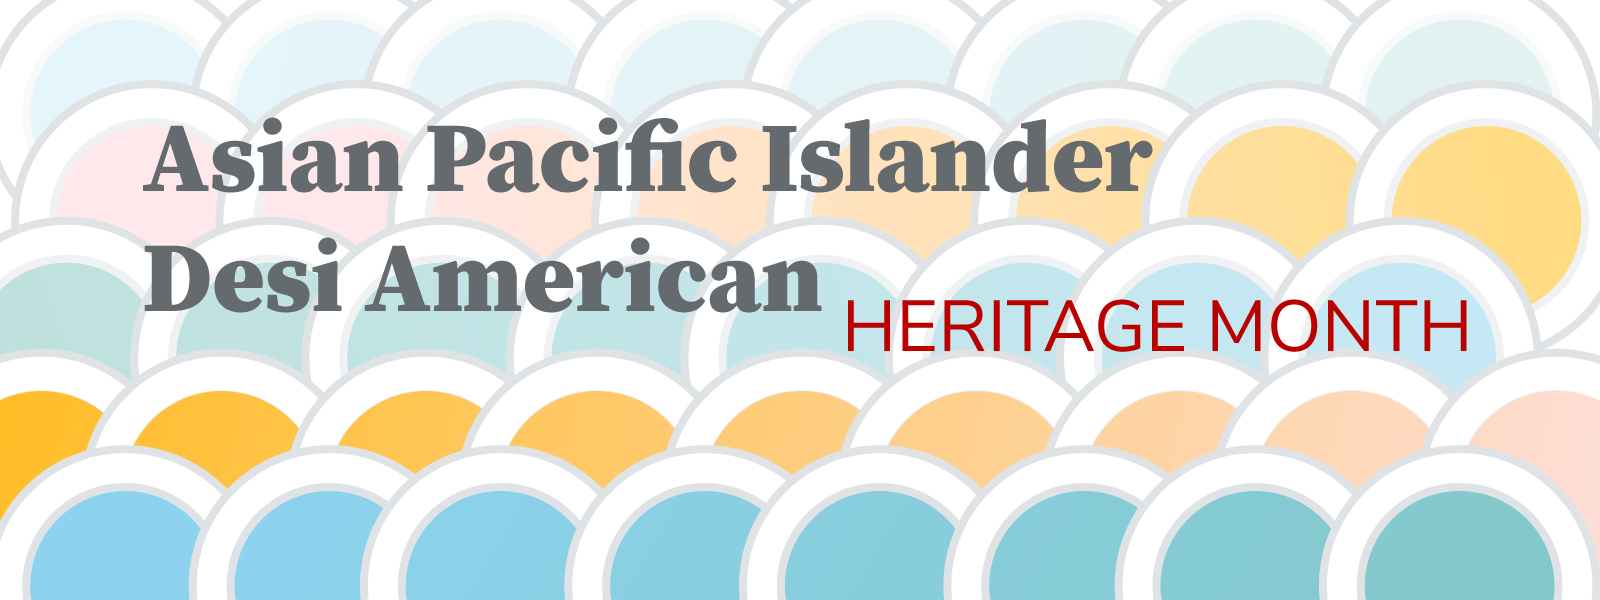 Asian Pacific Islander Desi American Heritage Month picture with circle pattern